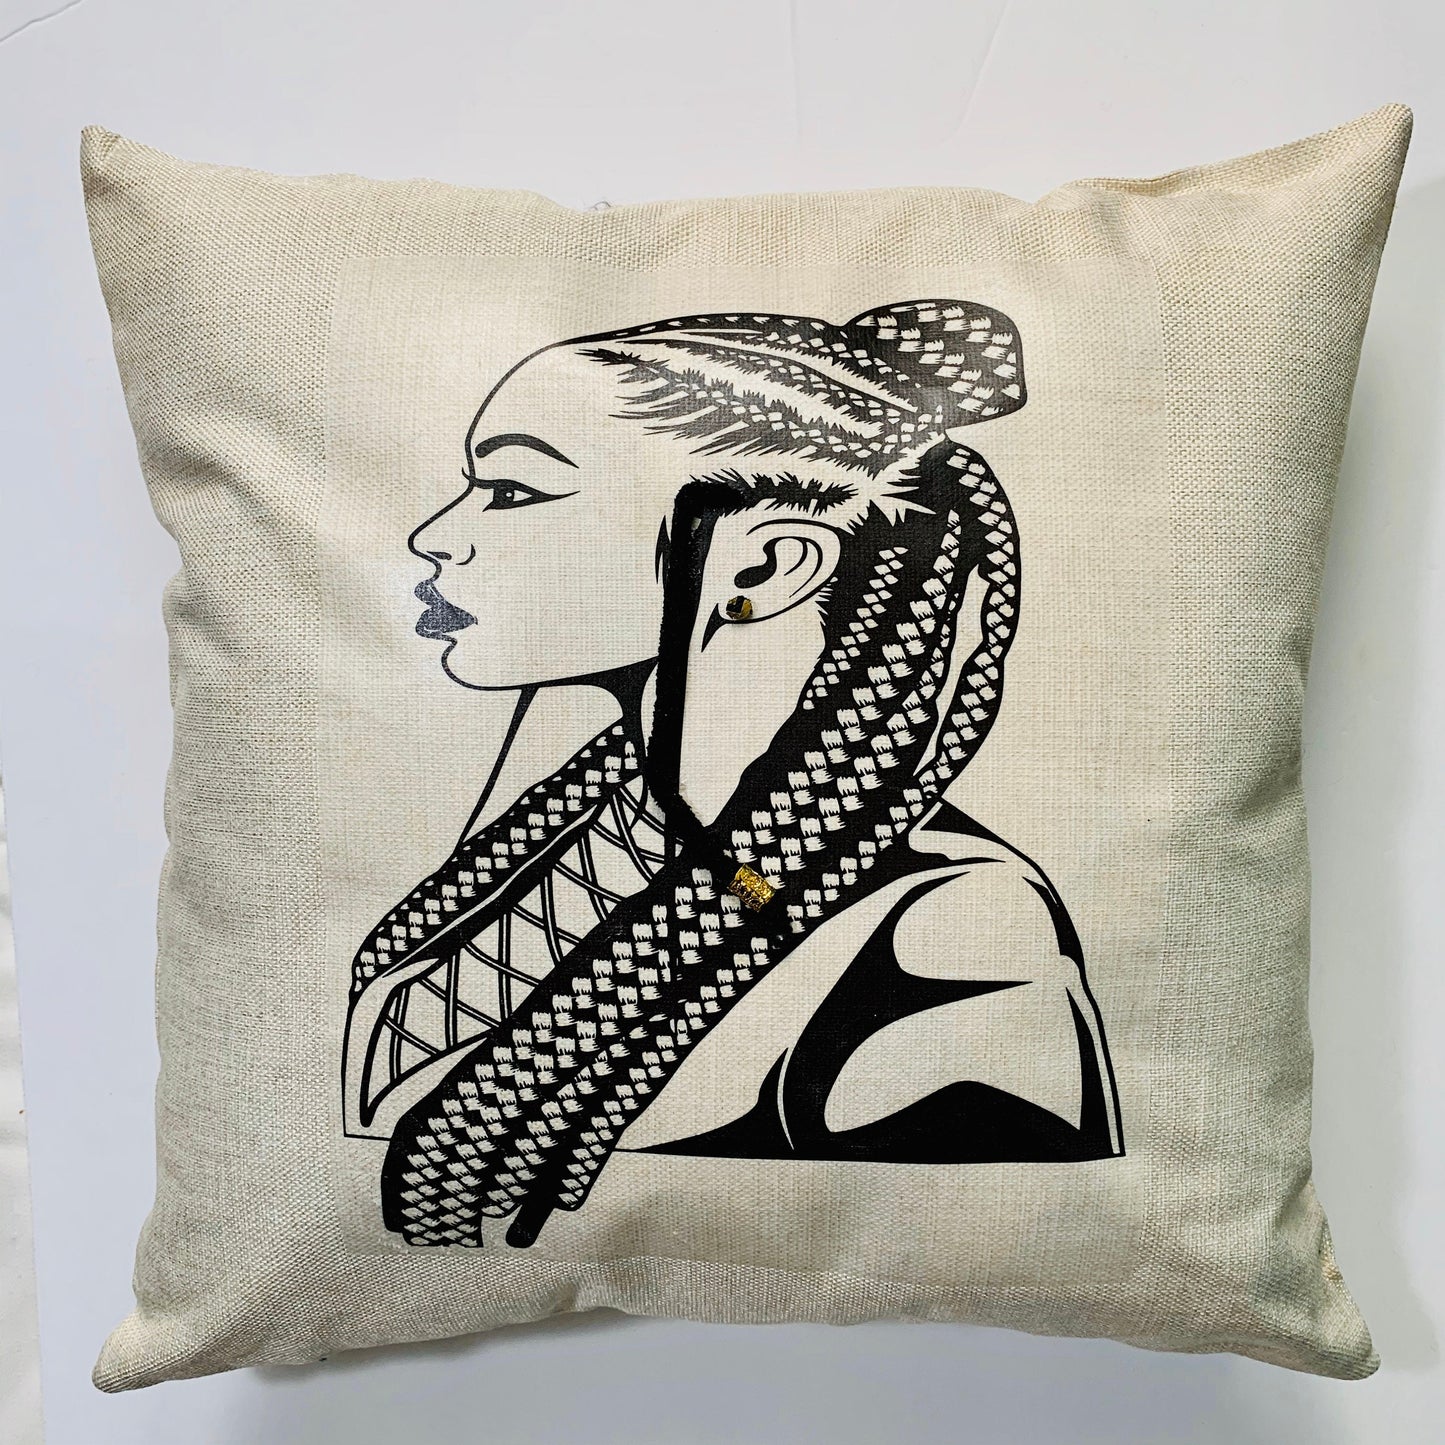 Cornrow Lady Handmade Throw Pillow with Custom Printed Pillow Cushion Cover Decorative Throw Pillow for Home Décor 16 x 16 inches